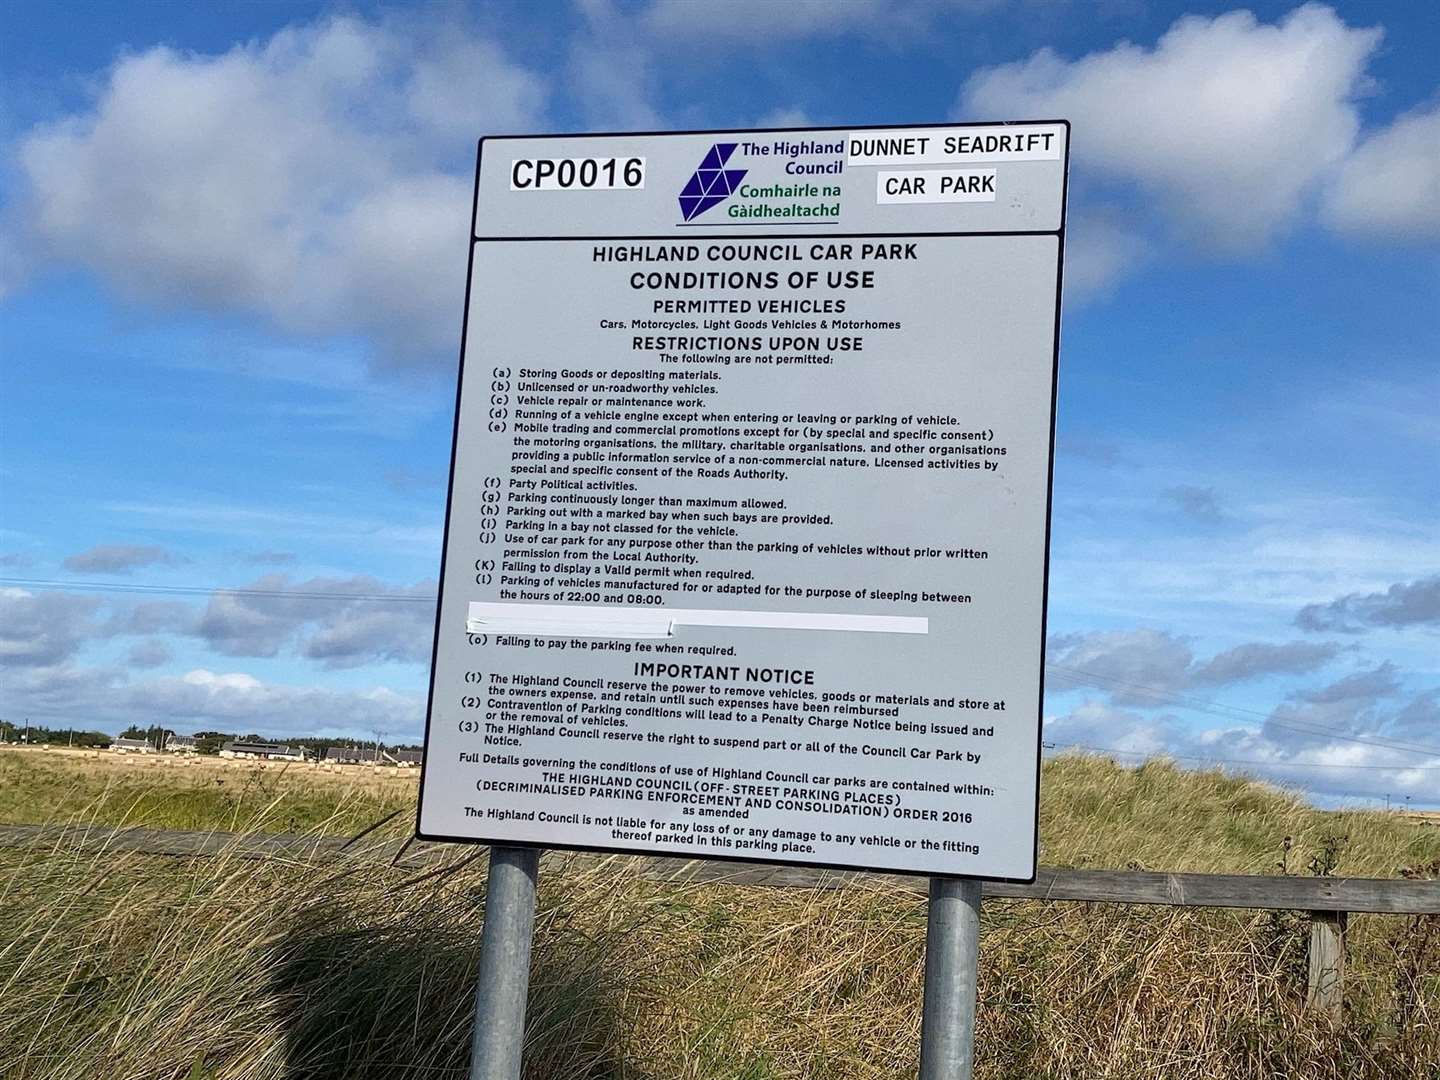 The control of use sign at Dunnet beach which was put up around August 10 by the Highland Council's parking services to allow enforcement of misuse of the car park. This picture shows the taped off trailer restriction, altered on August 25.